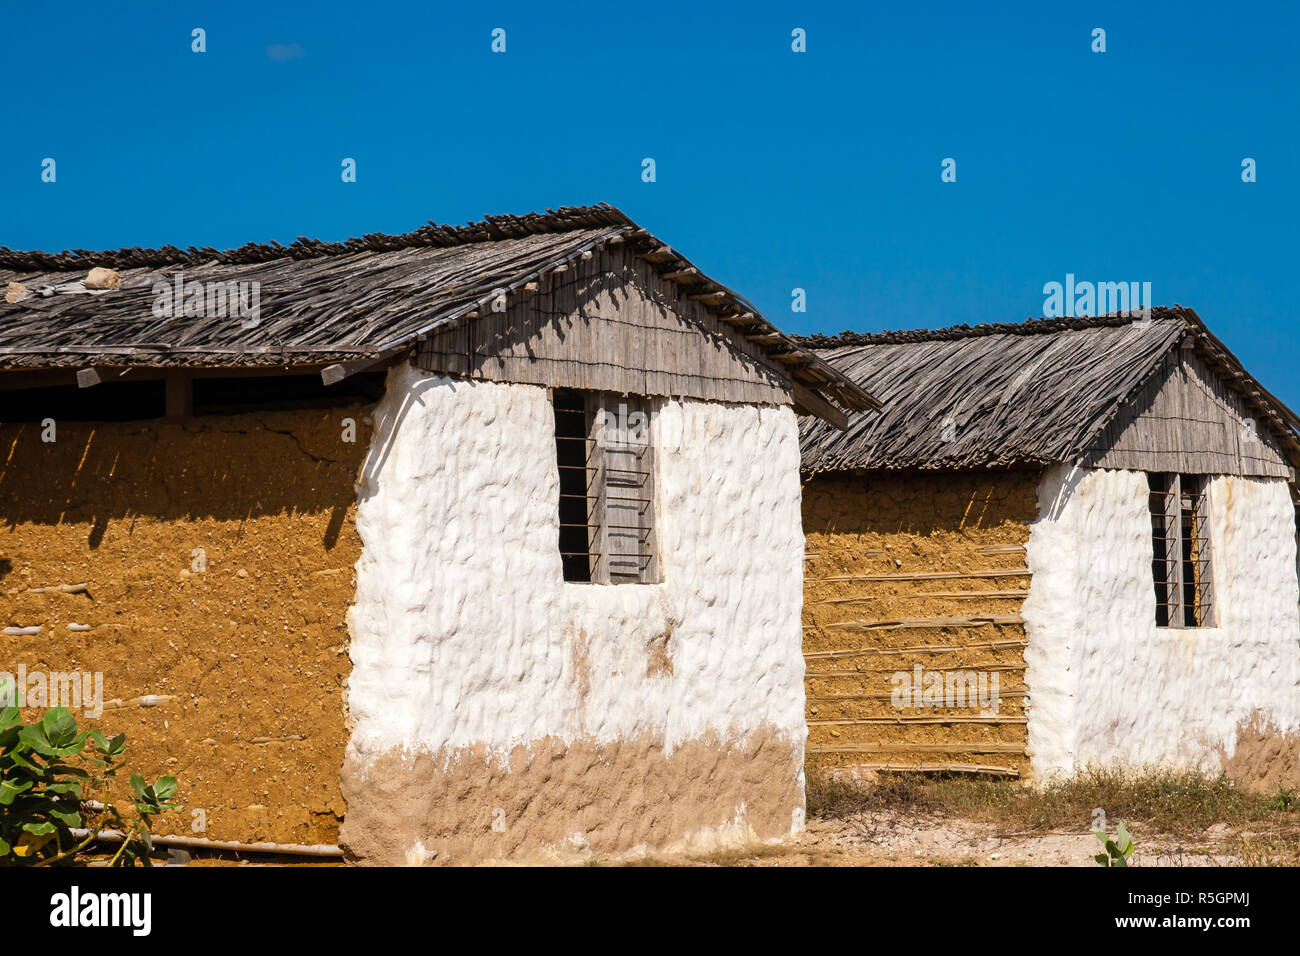 Traditional adobe house next to the sea under blue sky Stock Photo